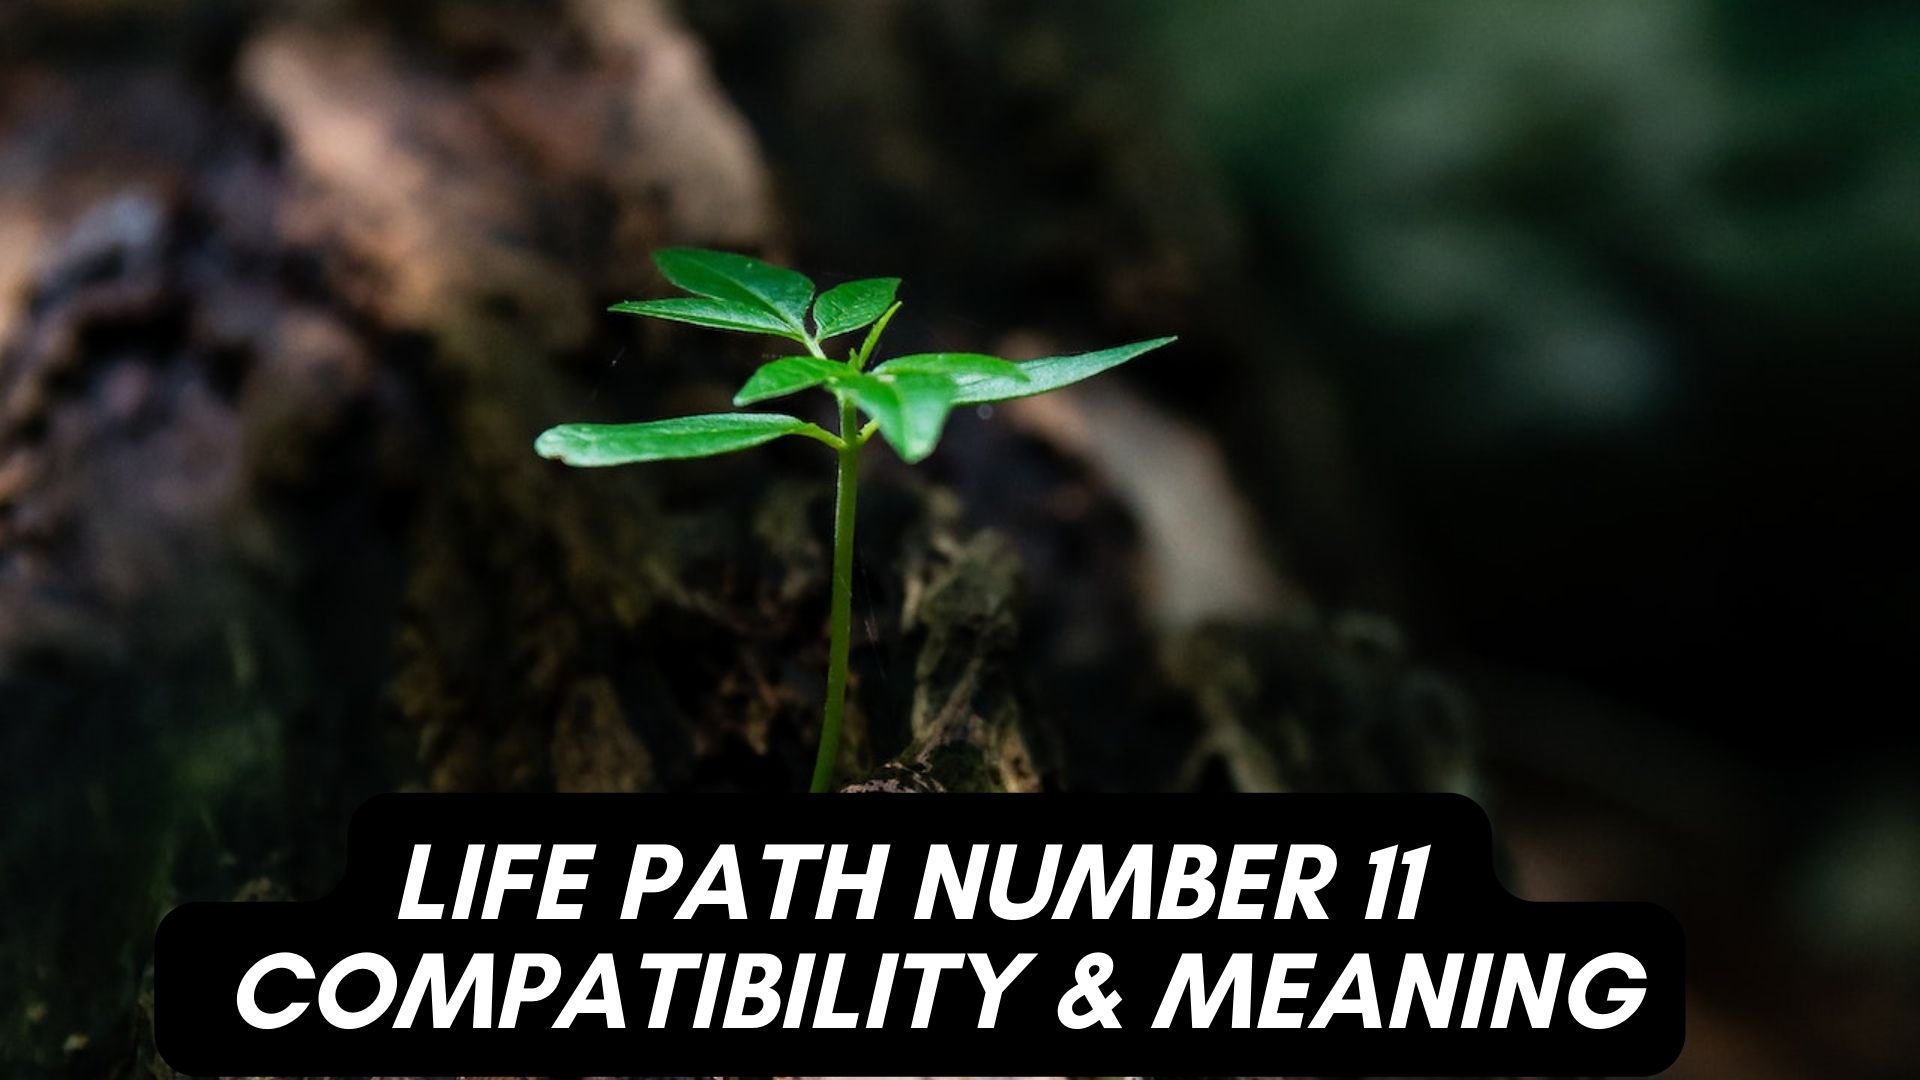 Life Path Number 11 - Compatibility & Meaning